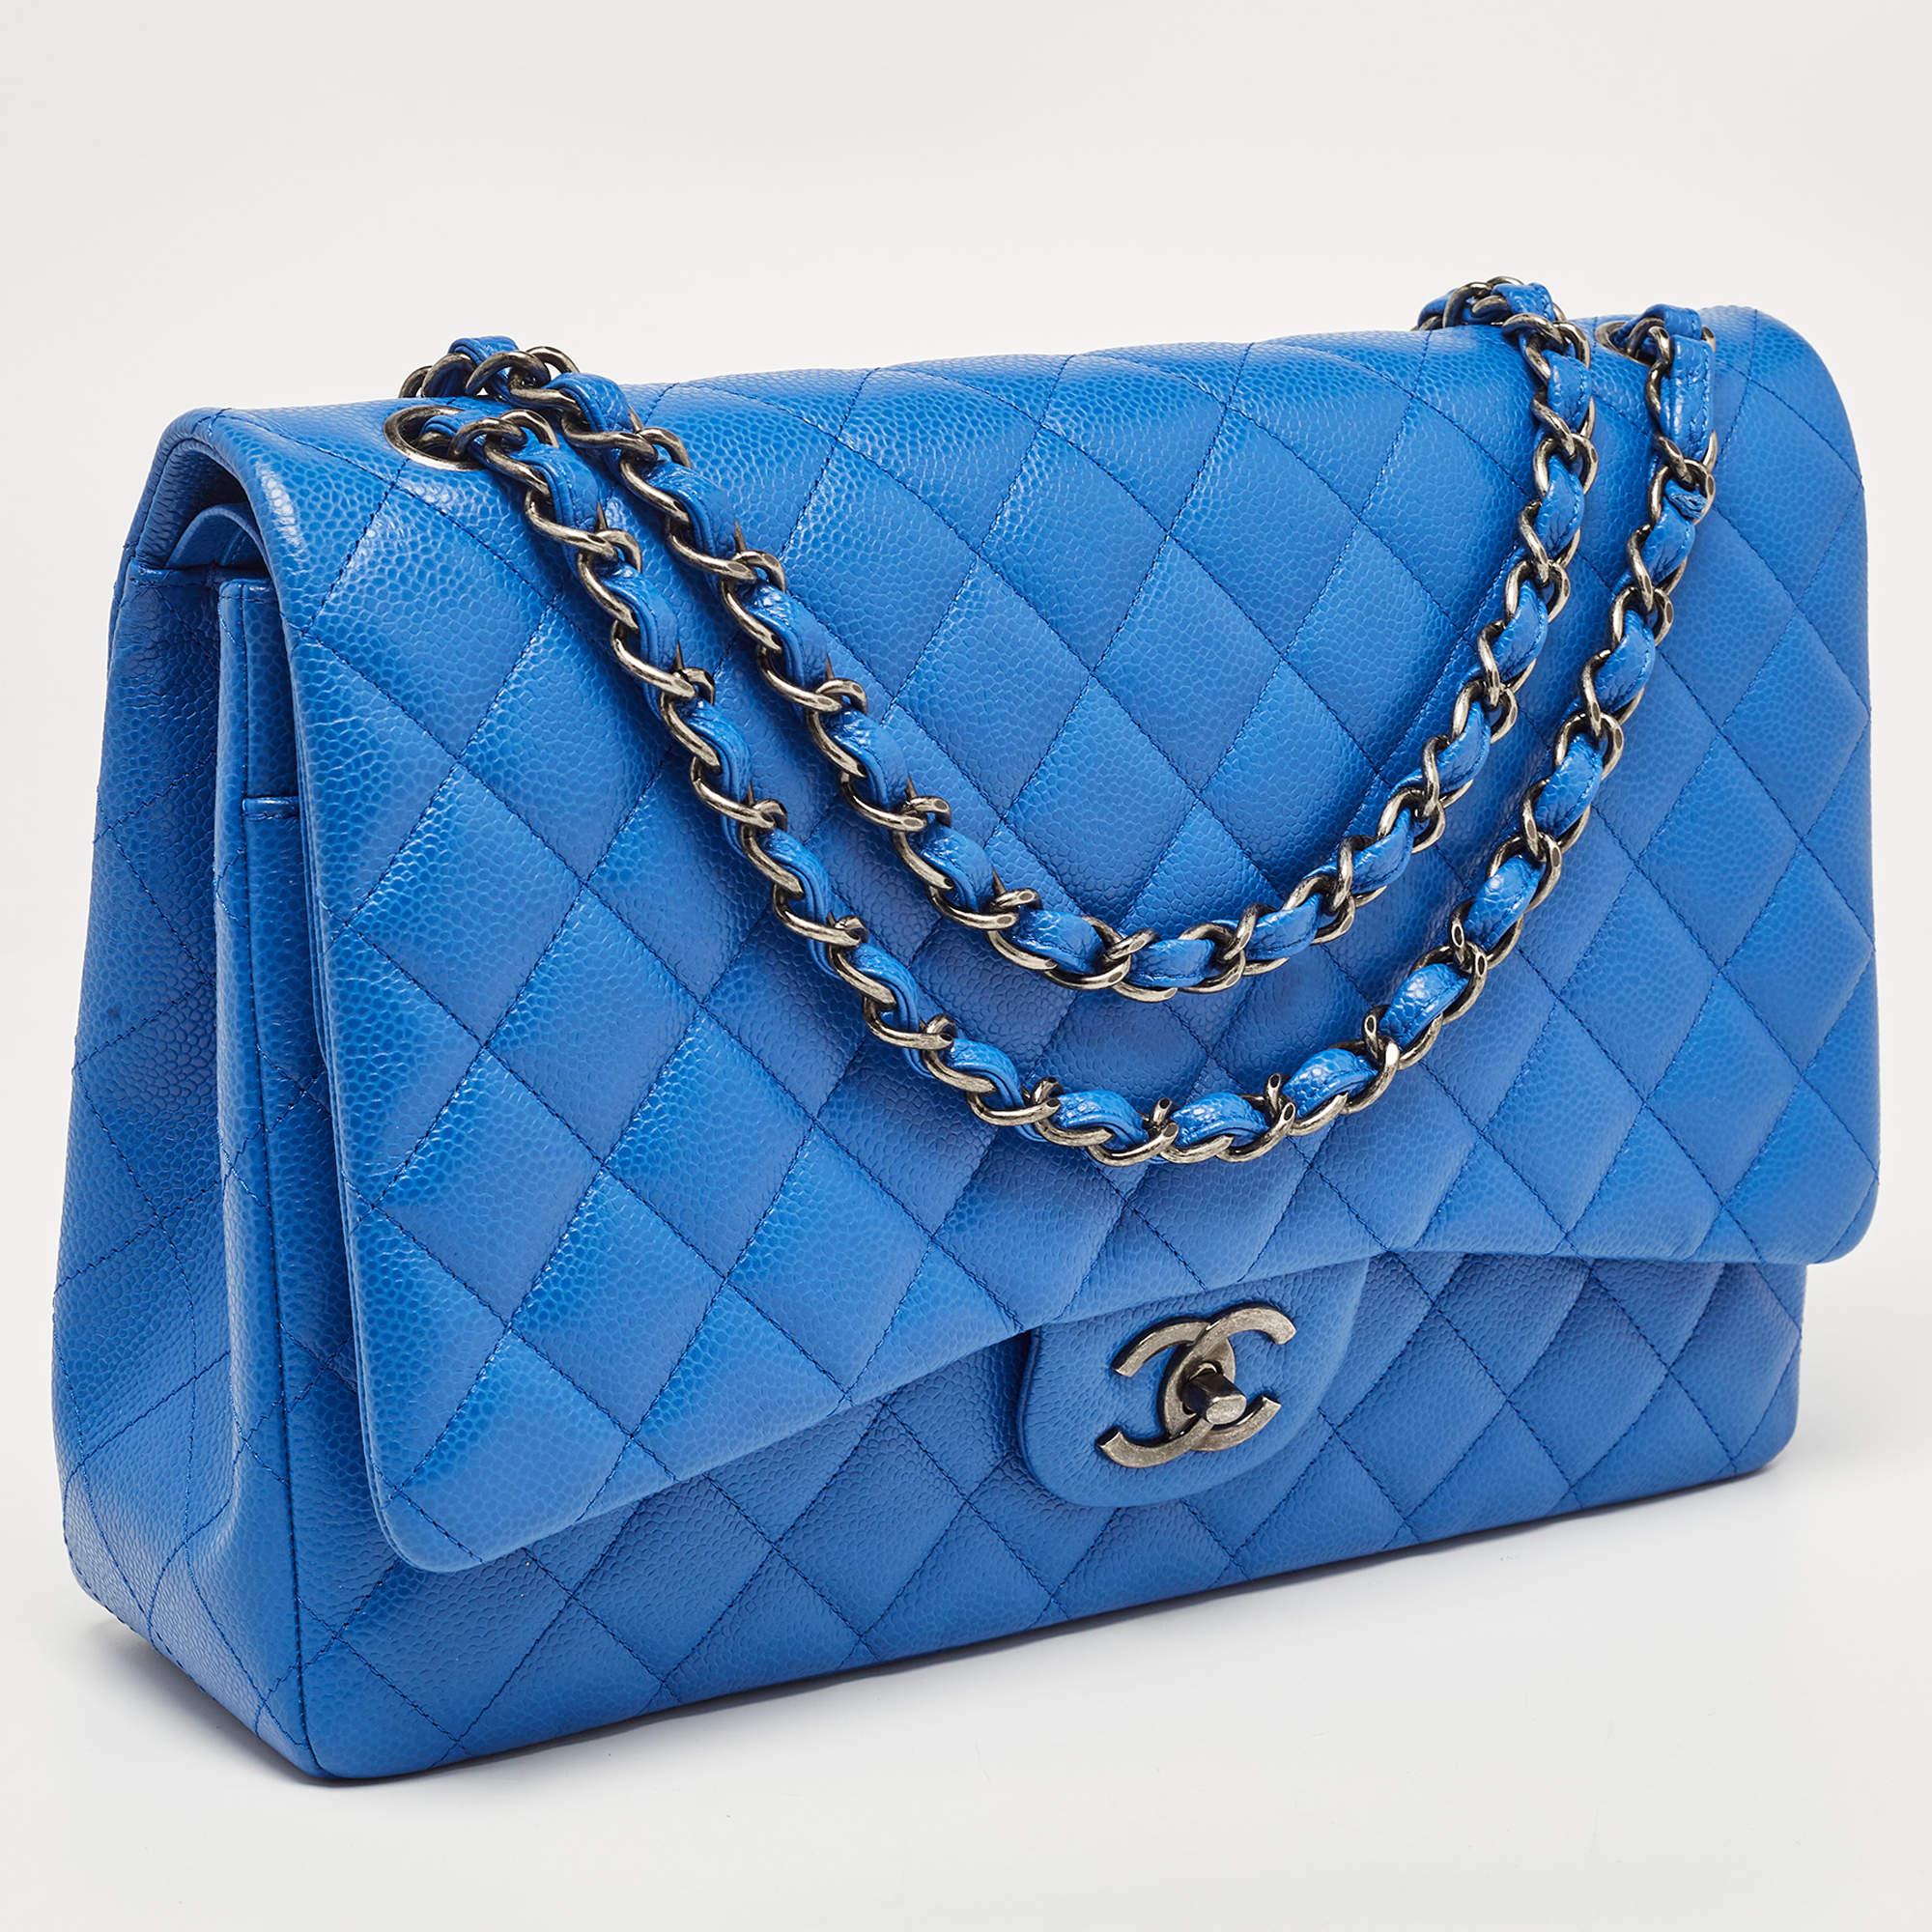 Chanel Blue Quilted Caviar Leather Maxi Classic Double Flap Bag In Good Condition For Sale In Dubai, Al Qouz 2